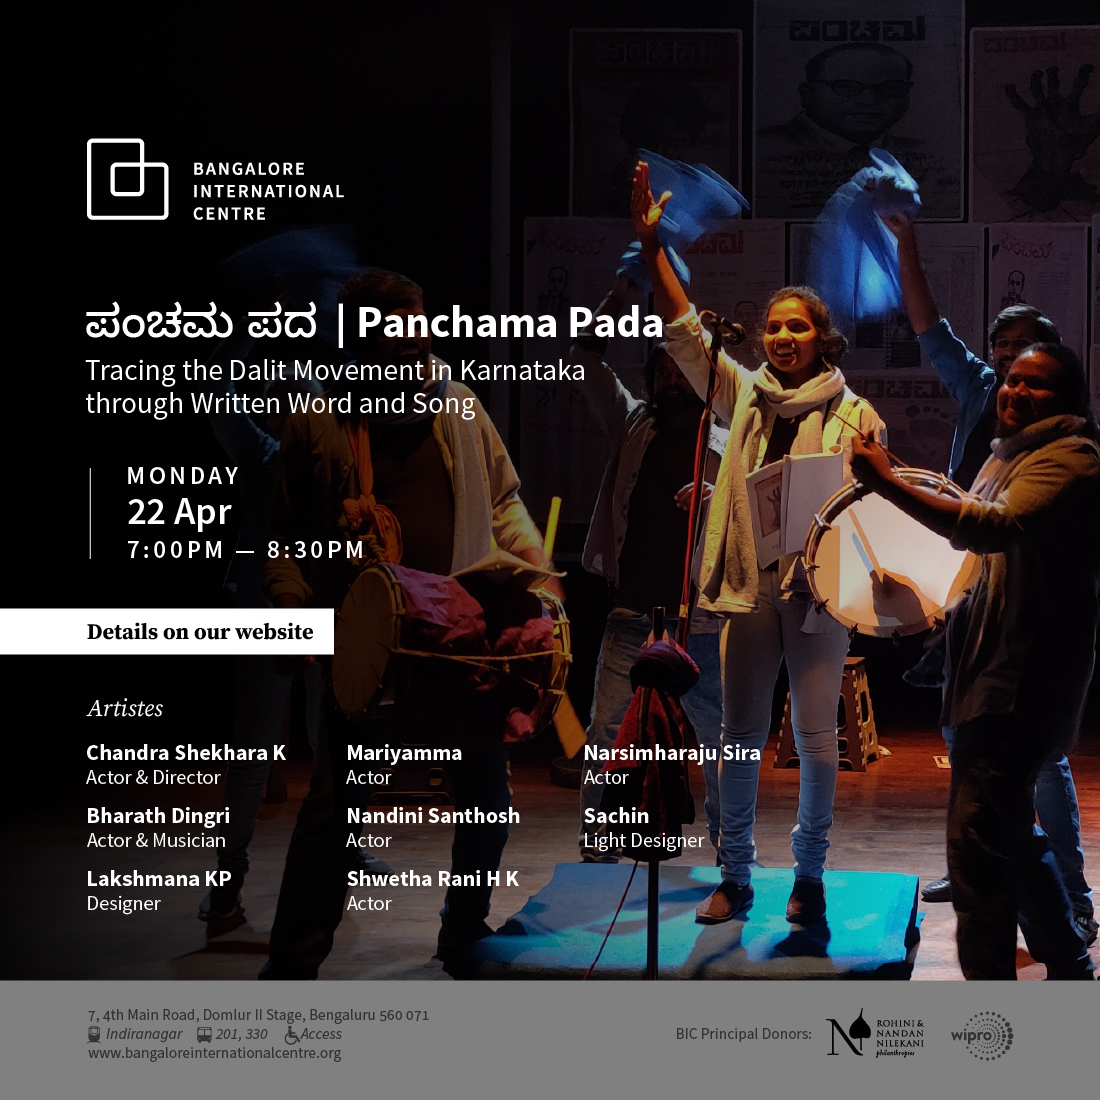 April 22 | Monday | 7:00 PM ಪಂಚಮ ಪದ | Panchama Pada Using performance, the Jangama Collective revisits some of these writings and places them alongside songs, skits, and their own memories to think about where one should look for an embodied archive of Dalit resistance.